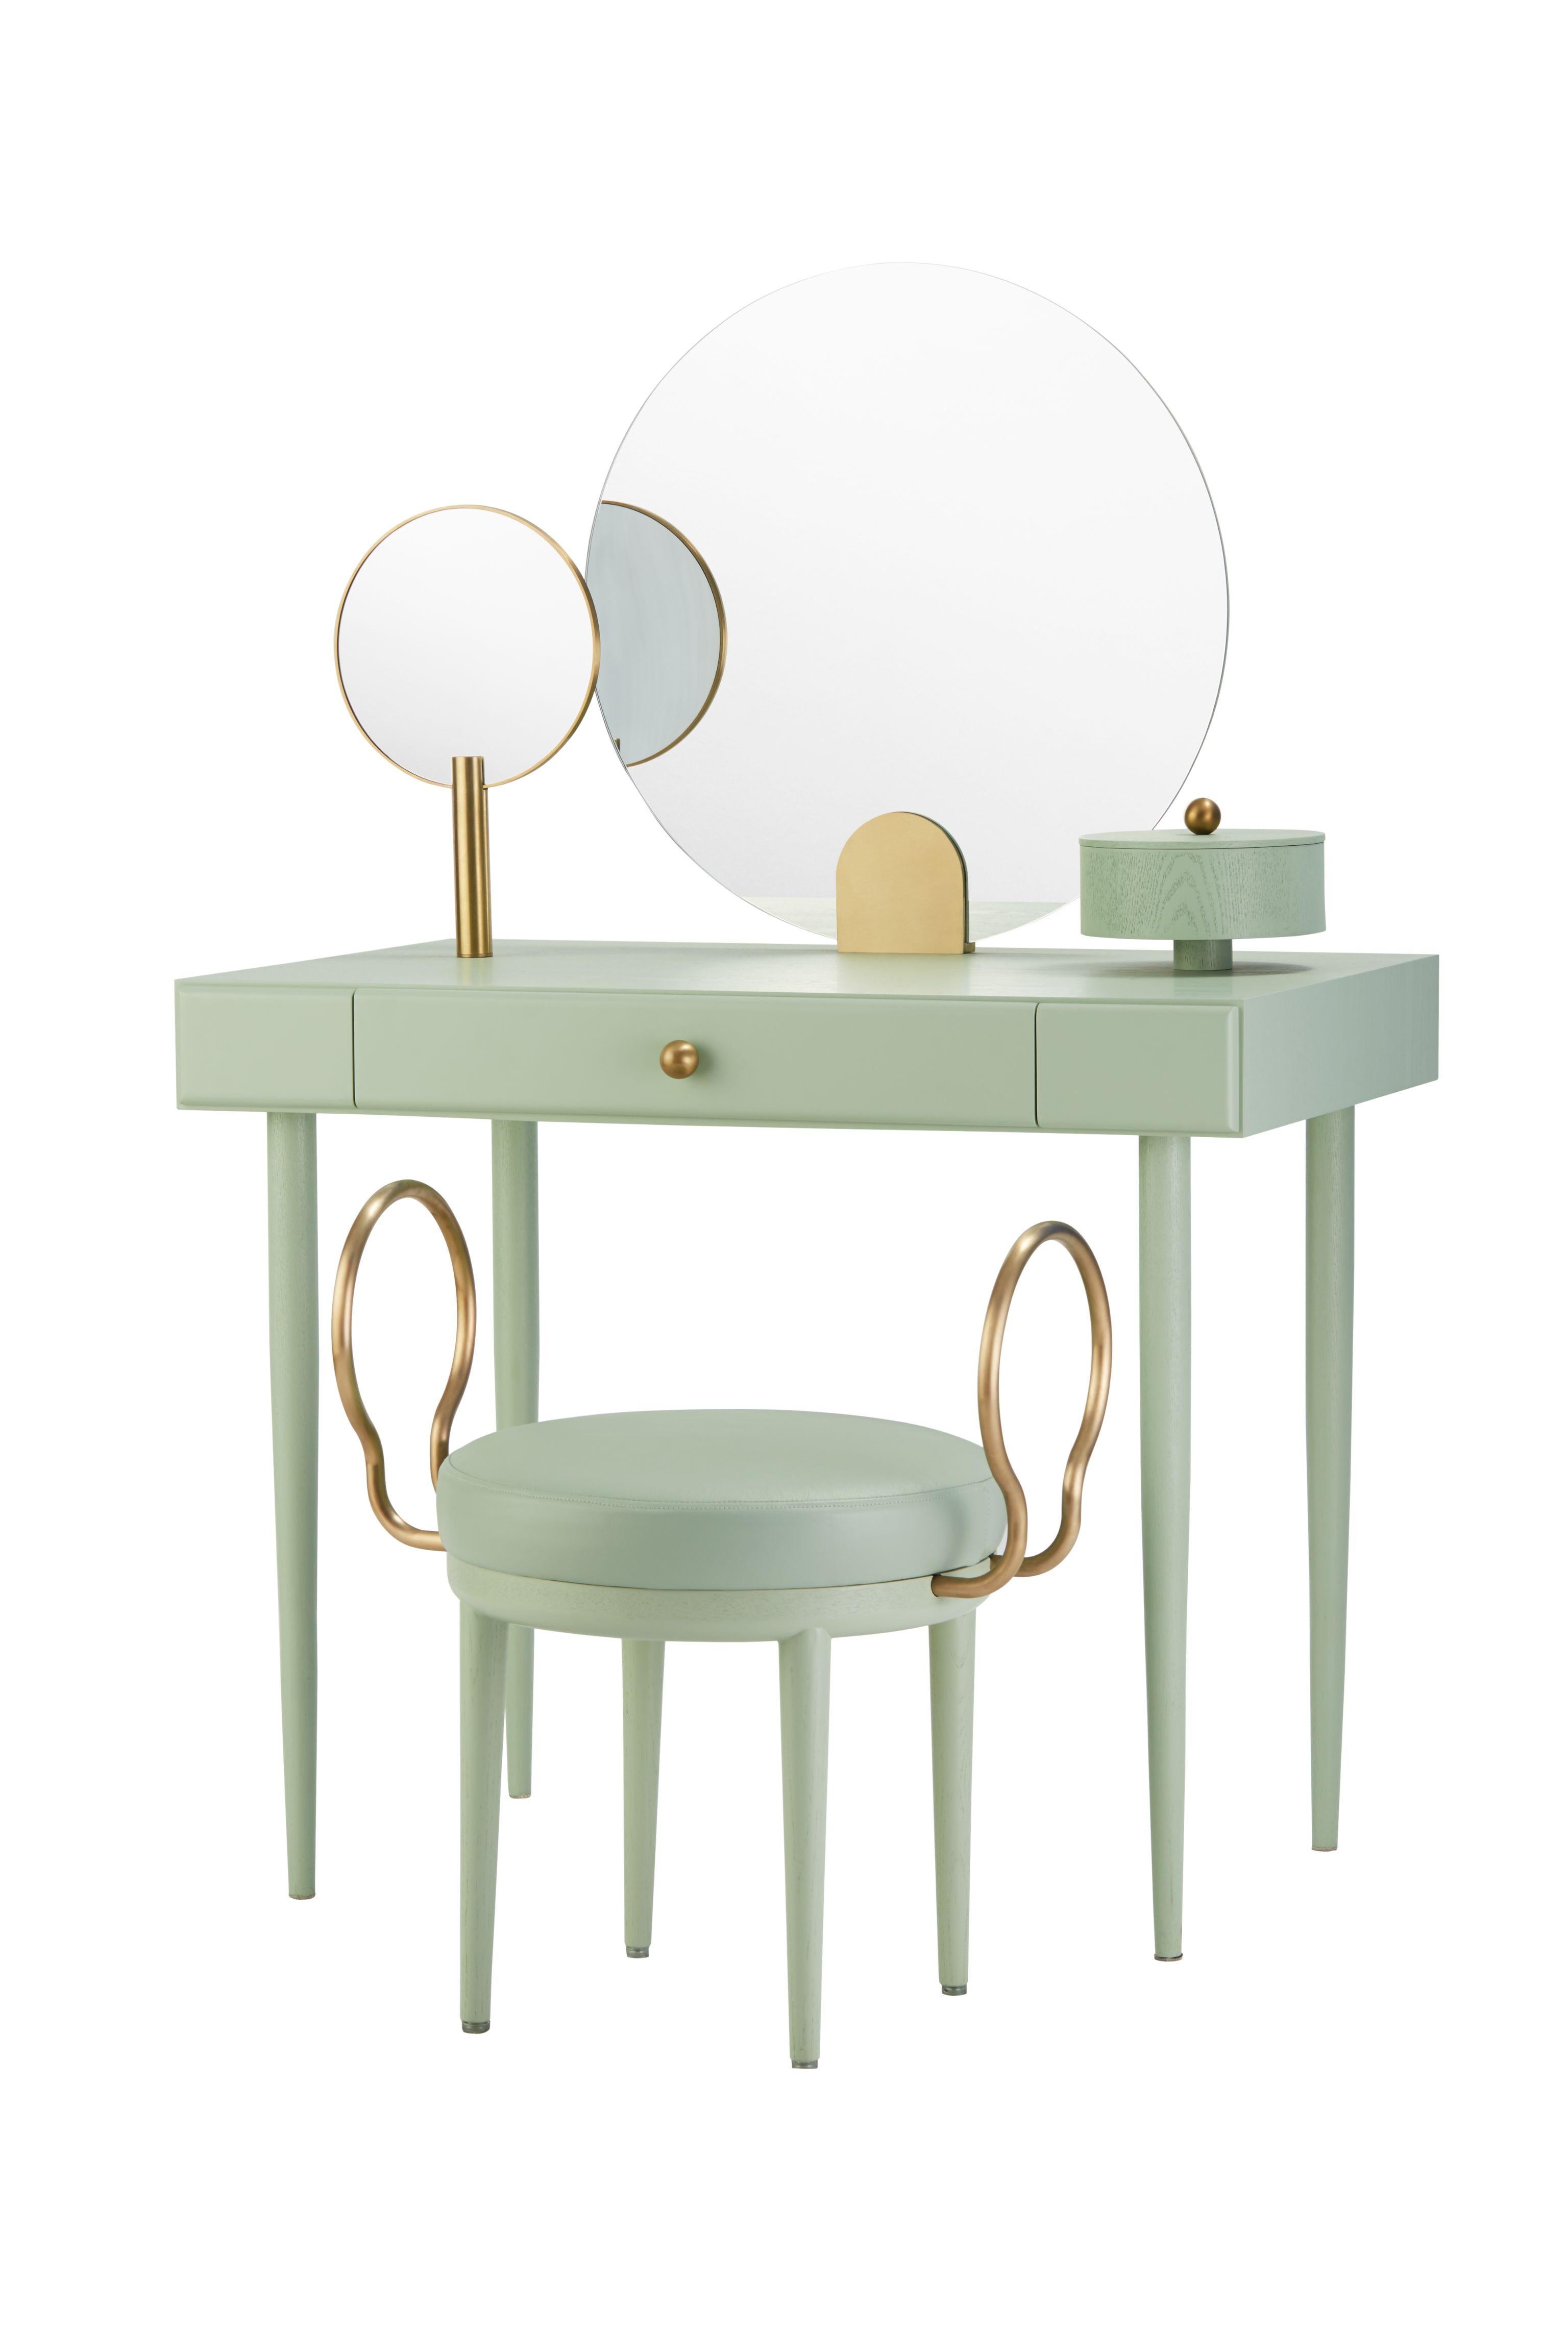 Contemporary Rose Selavy Vanity Desk with Stool by Thomas Dariel For Sale